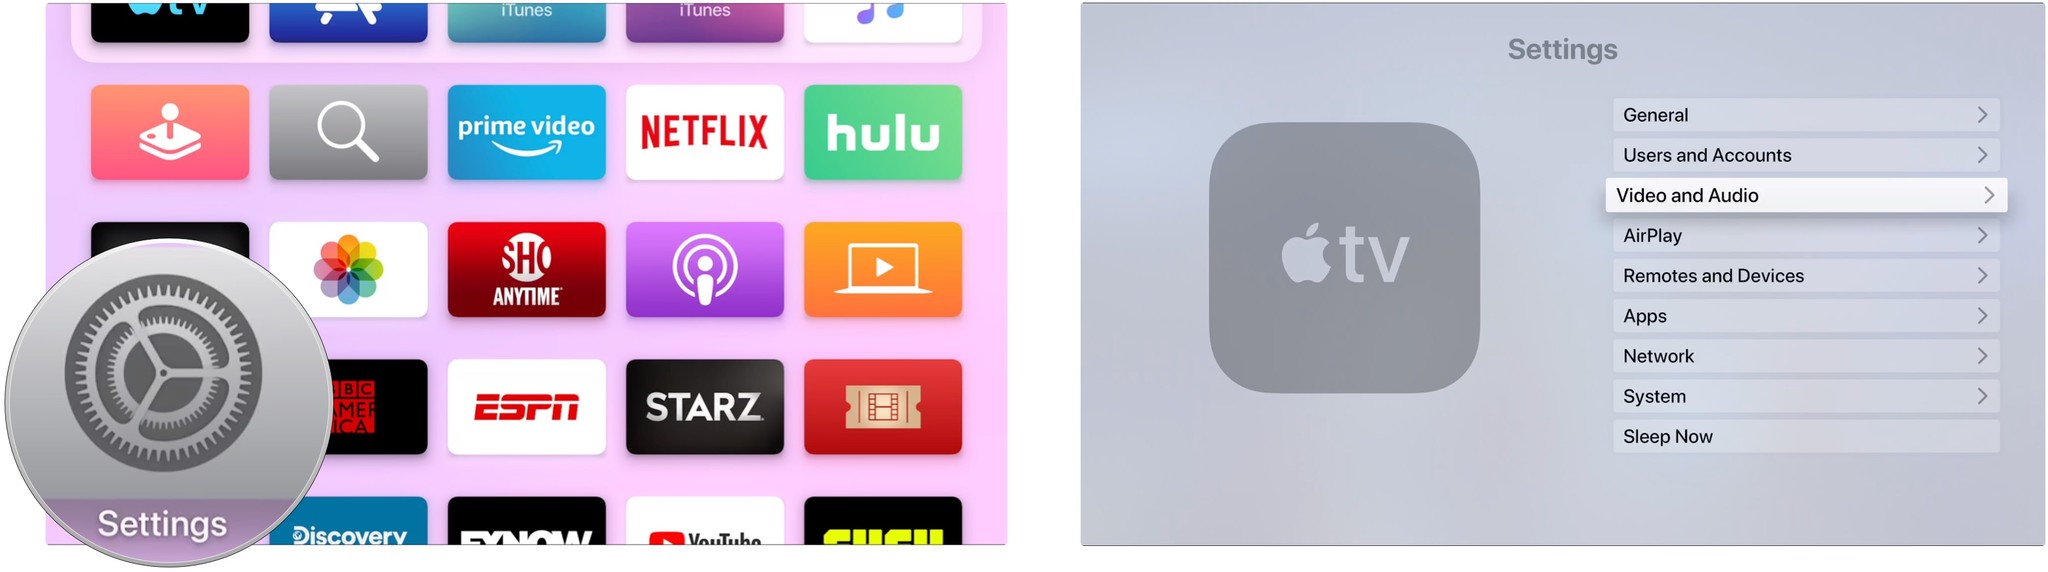 Apple TV video and audio